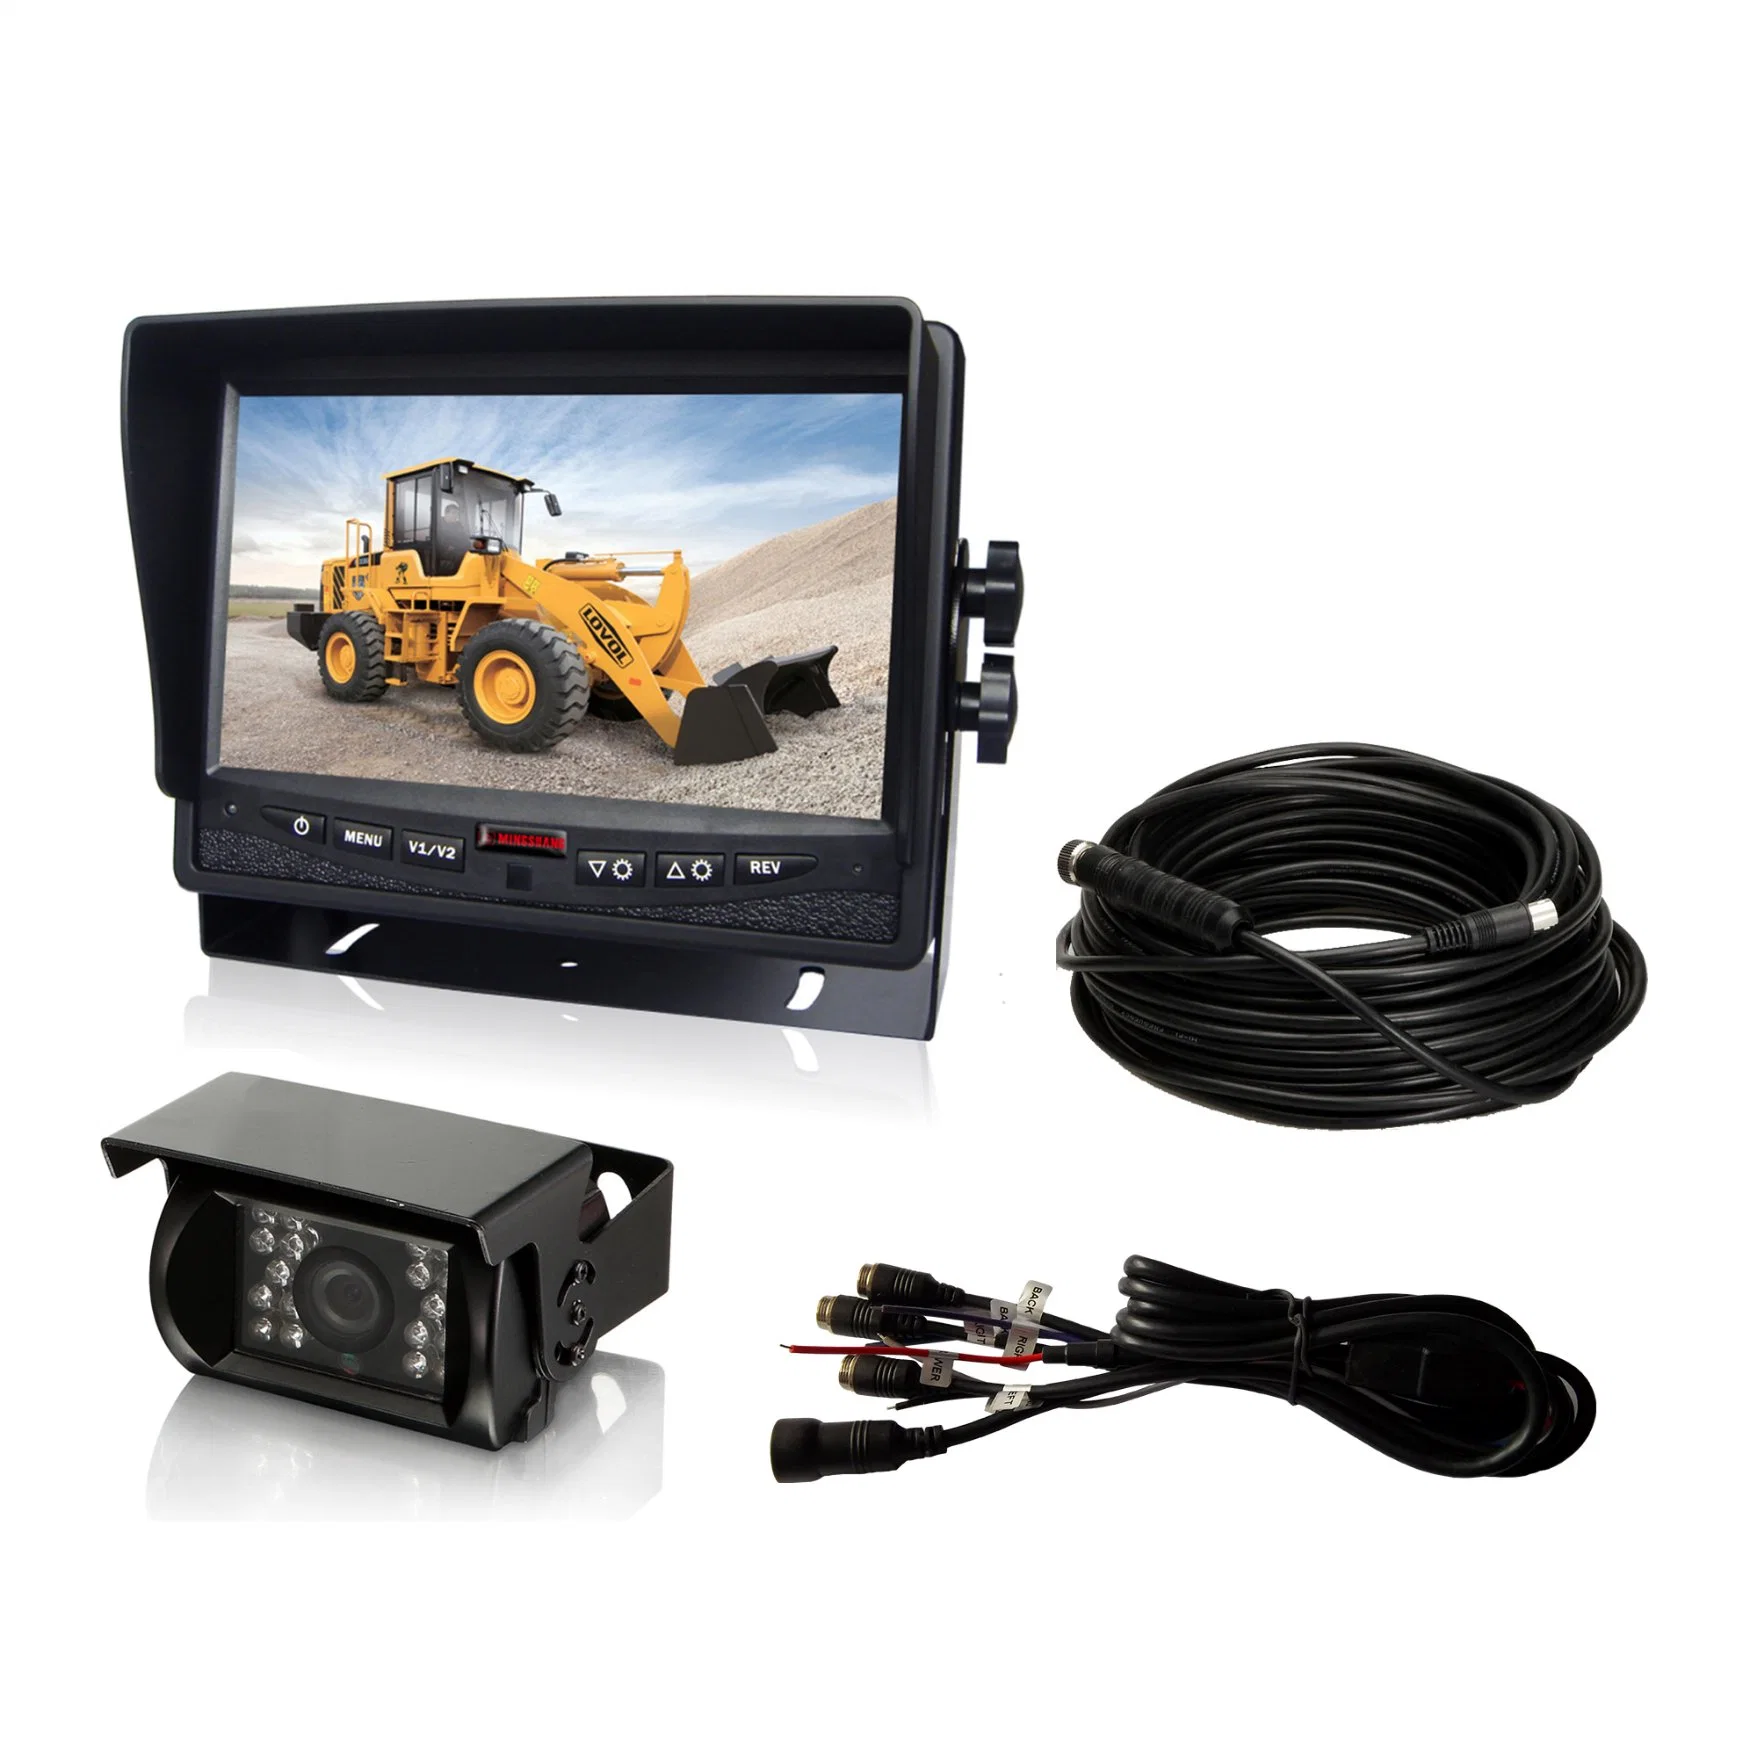 Car Rear View System with 7" LCD Monitor